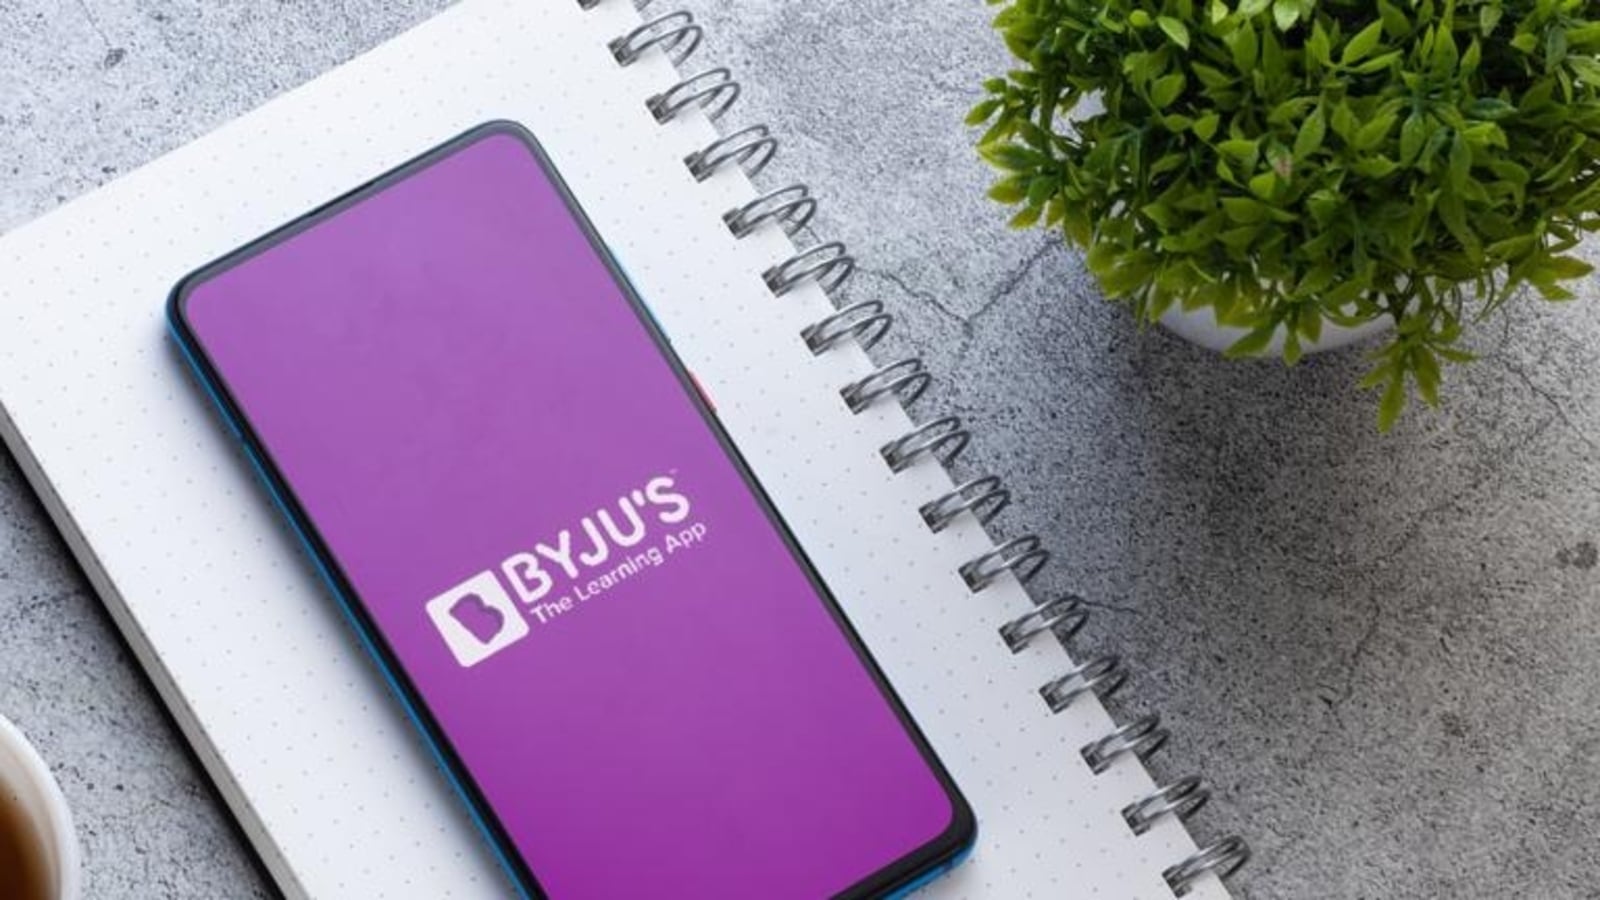 Byju’s lays off 1,500 employees, cites cost optimisation and outsourcing of operations